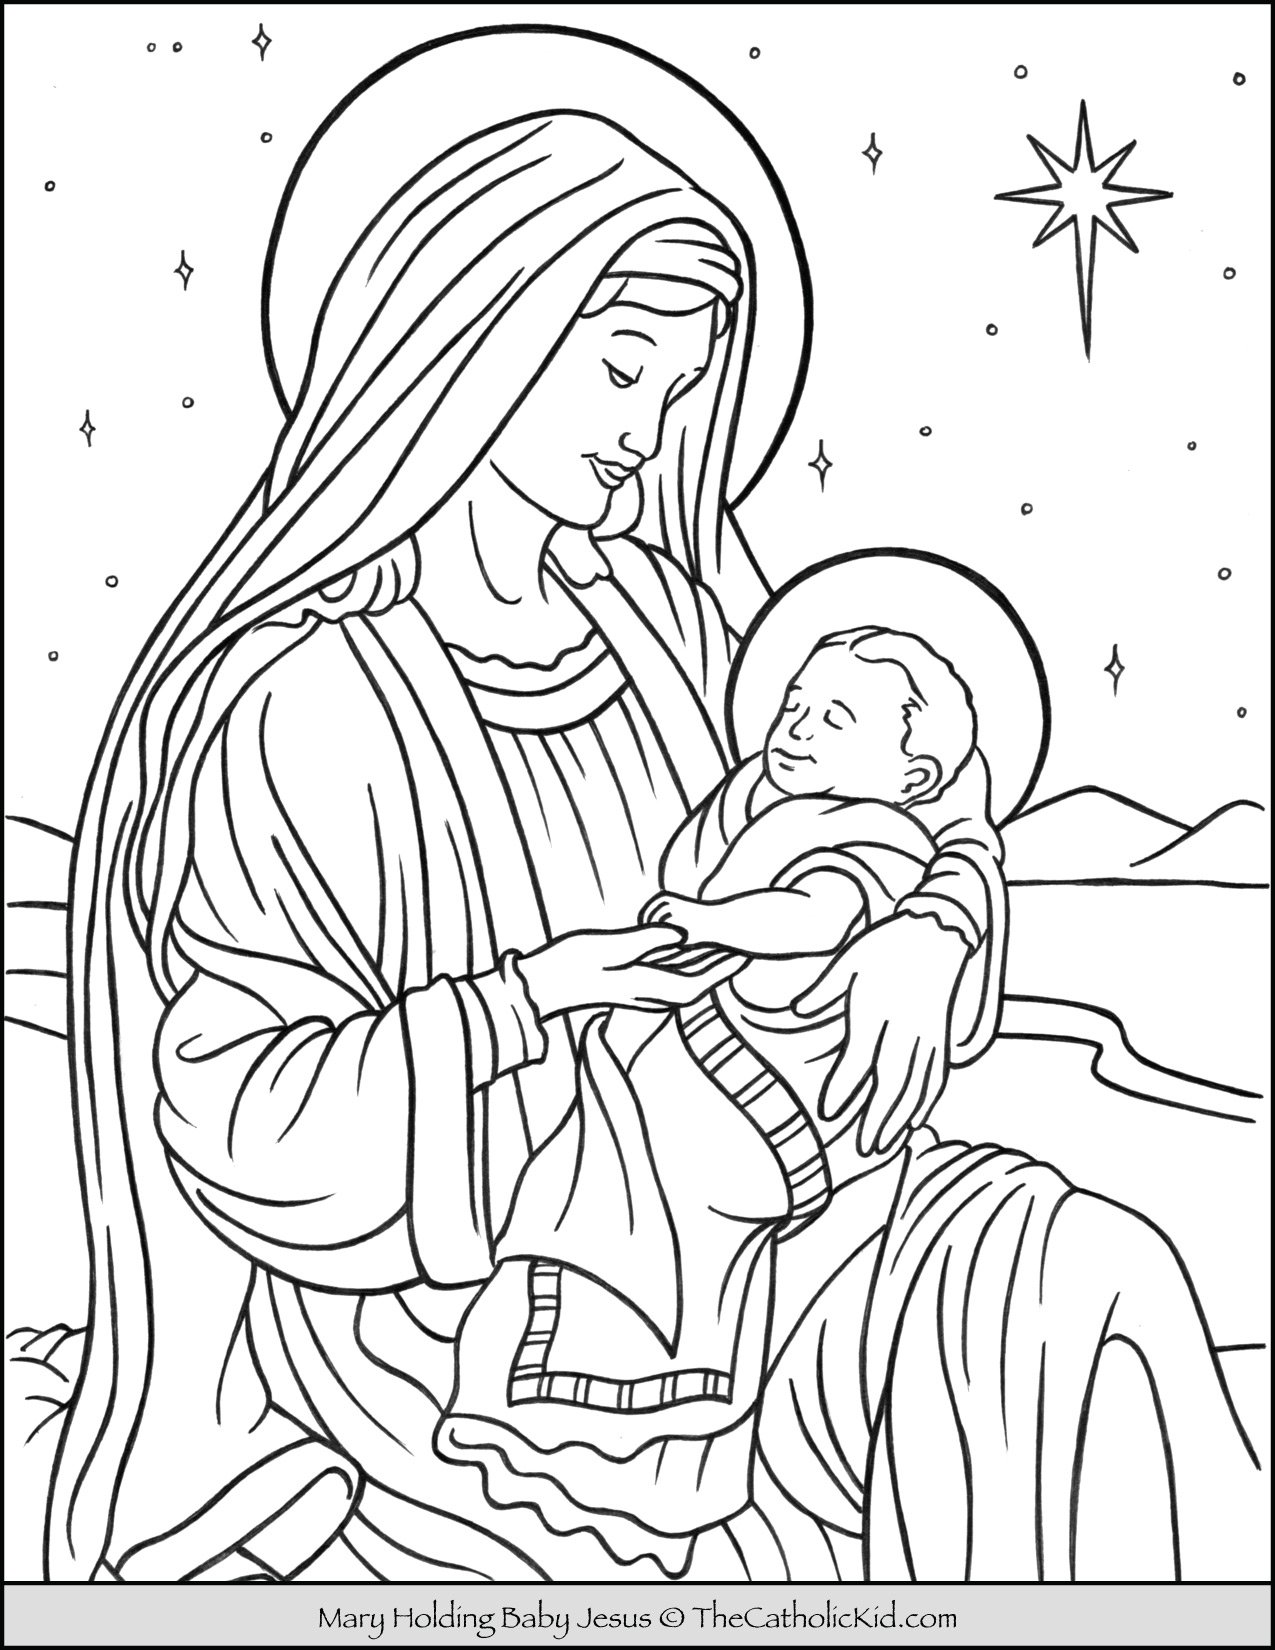 Mary With Baby Jesus in Bethlehem Coloring Page - TheCatholicKid.com